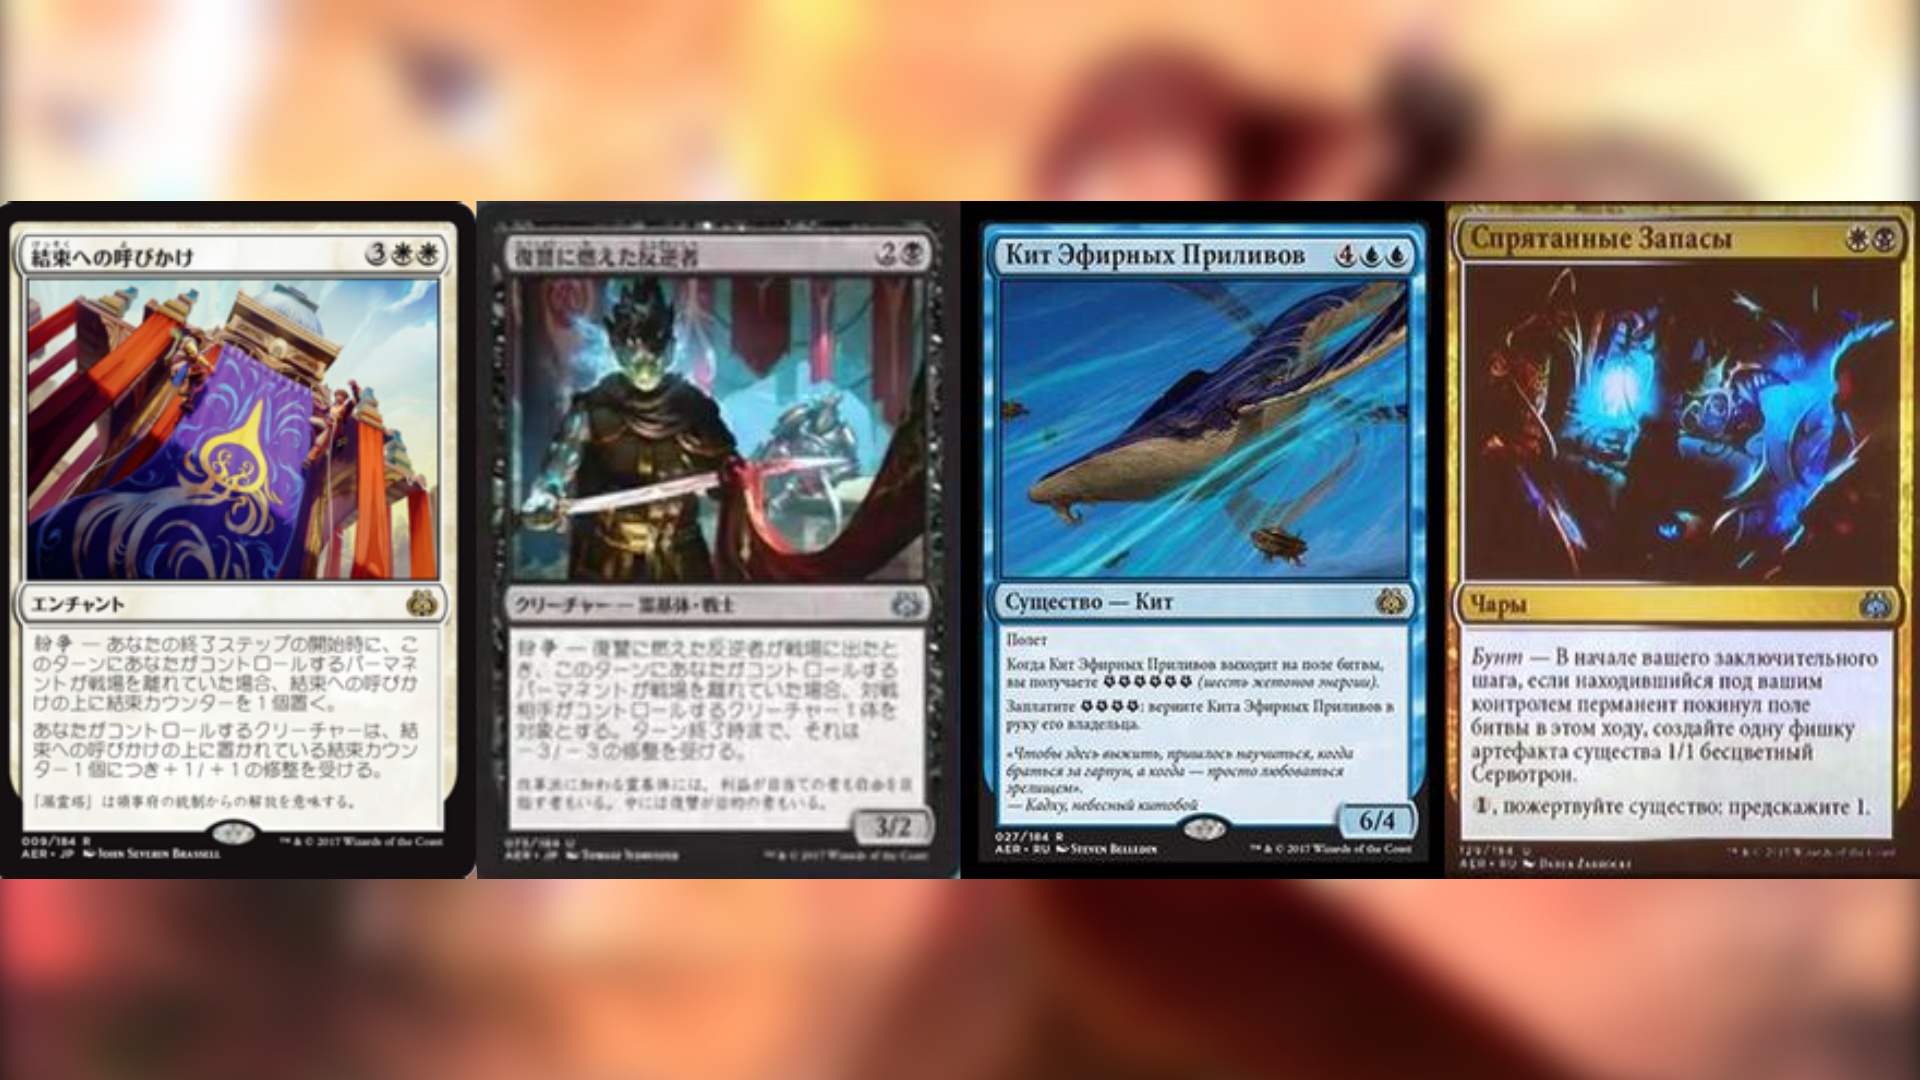 Aether Revolt magic the gathering cards with 4 in a row all written in different languages mostly chinese and cryillic characters